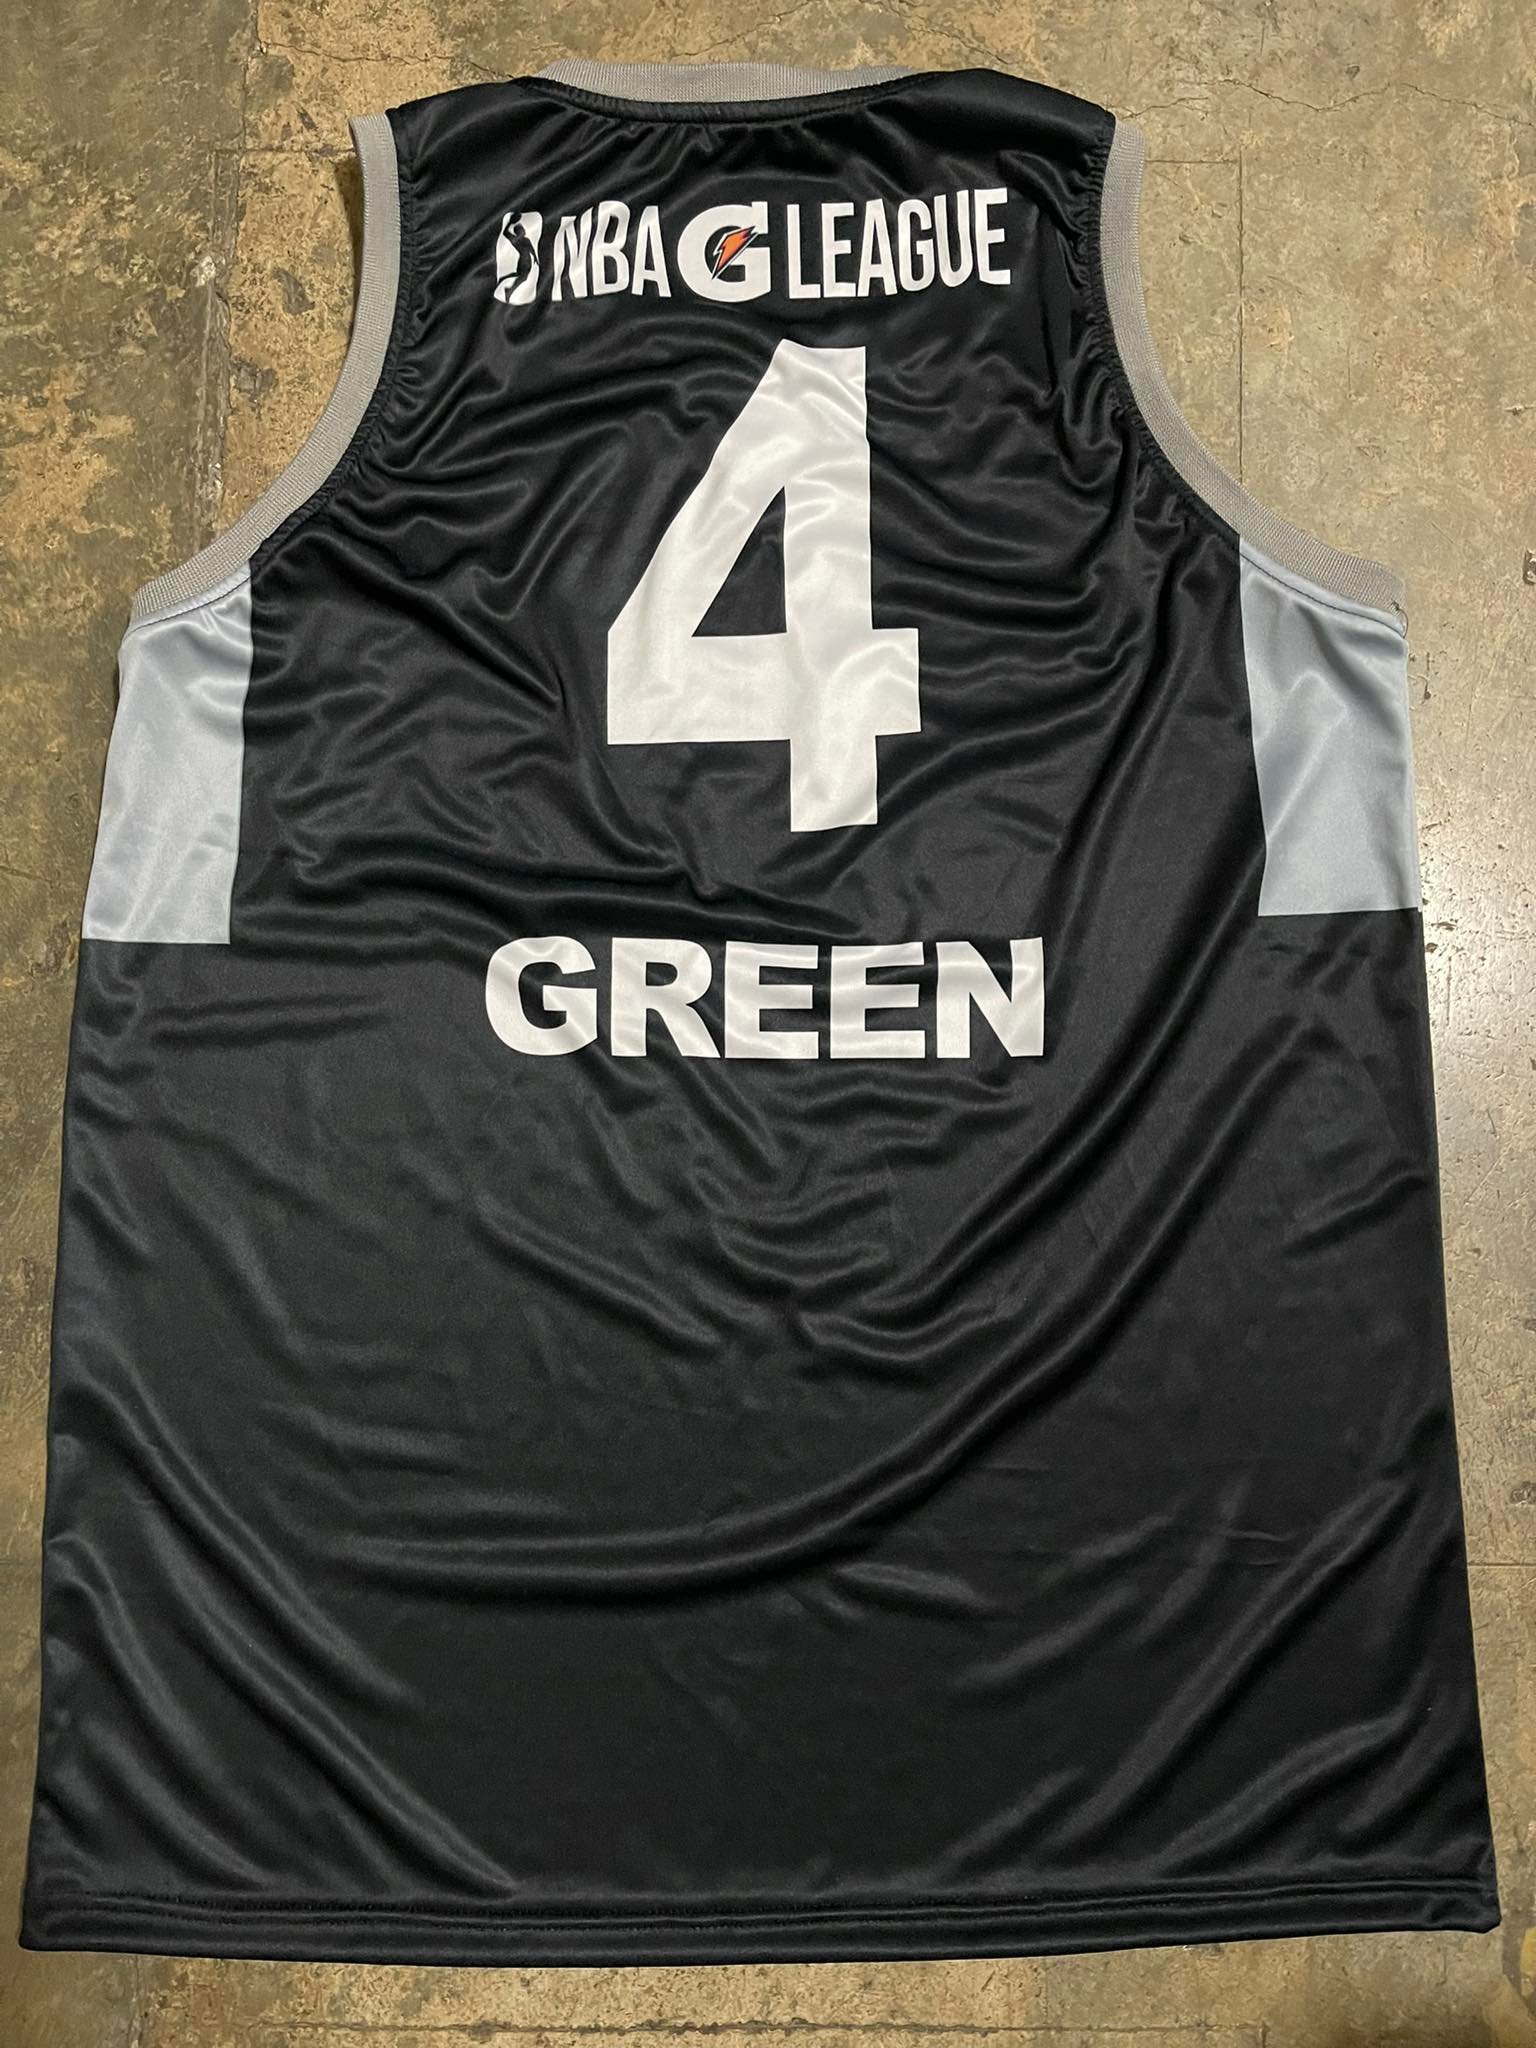 Ignite Jersey Customized GNITE NBA GLEAGUE JALEN GREEN BLACK WHITE JERSEY  GREEN#4 SUBLIMATION Basketball JERSEY for Men Customized Name and Number